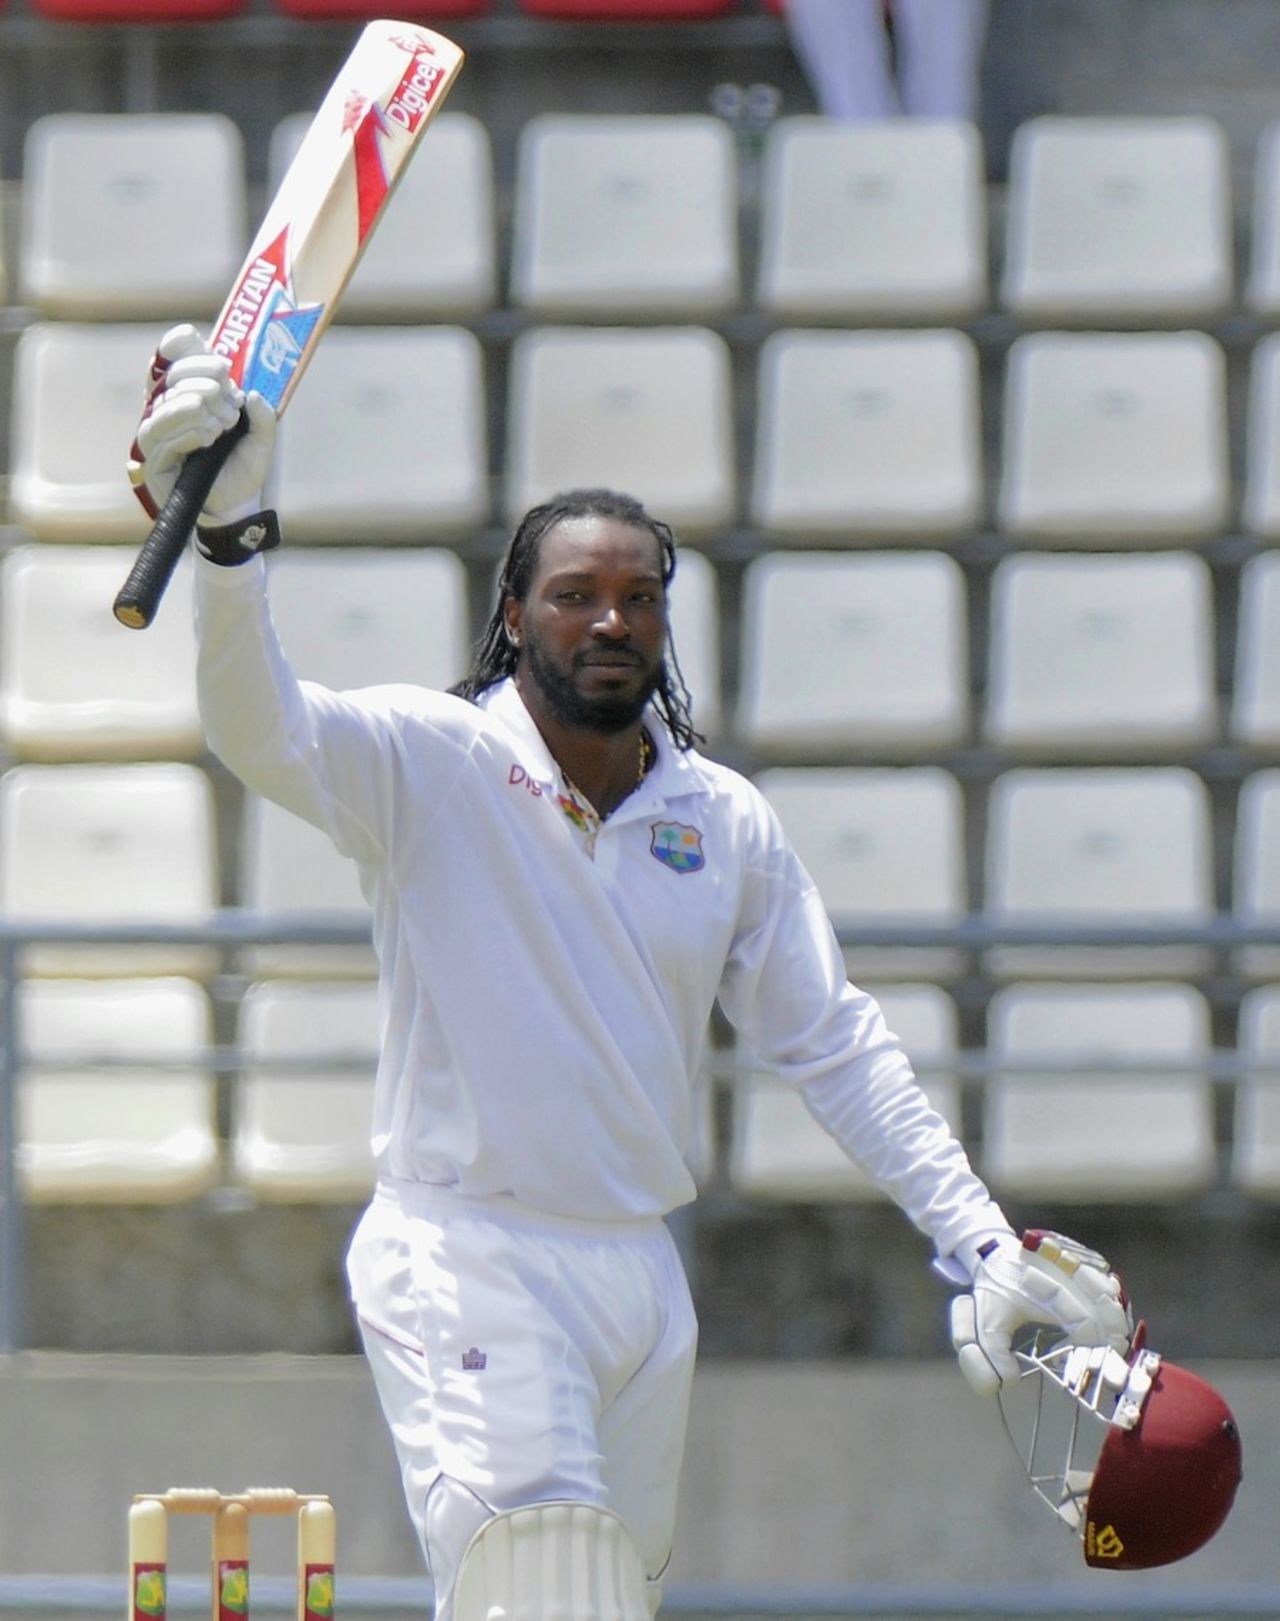 Chris Gayle raises his bat after reaching his hundred, West Indies v Zimbabwe, 2nd Test, Roseau, 2nd day, March 21, 2013